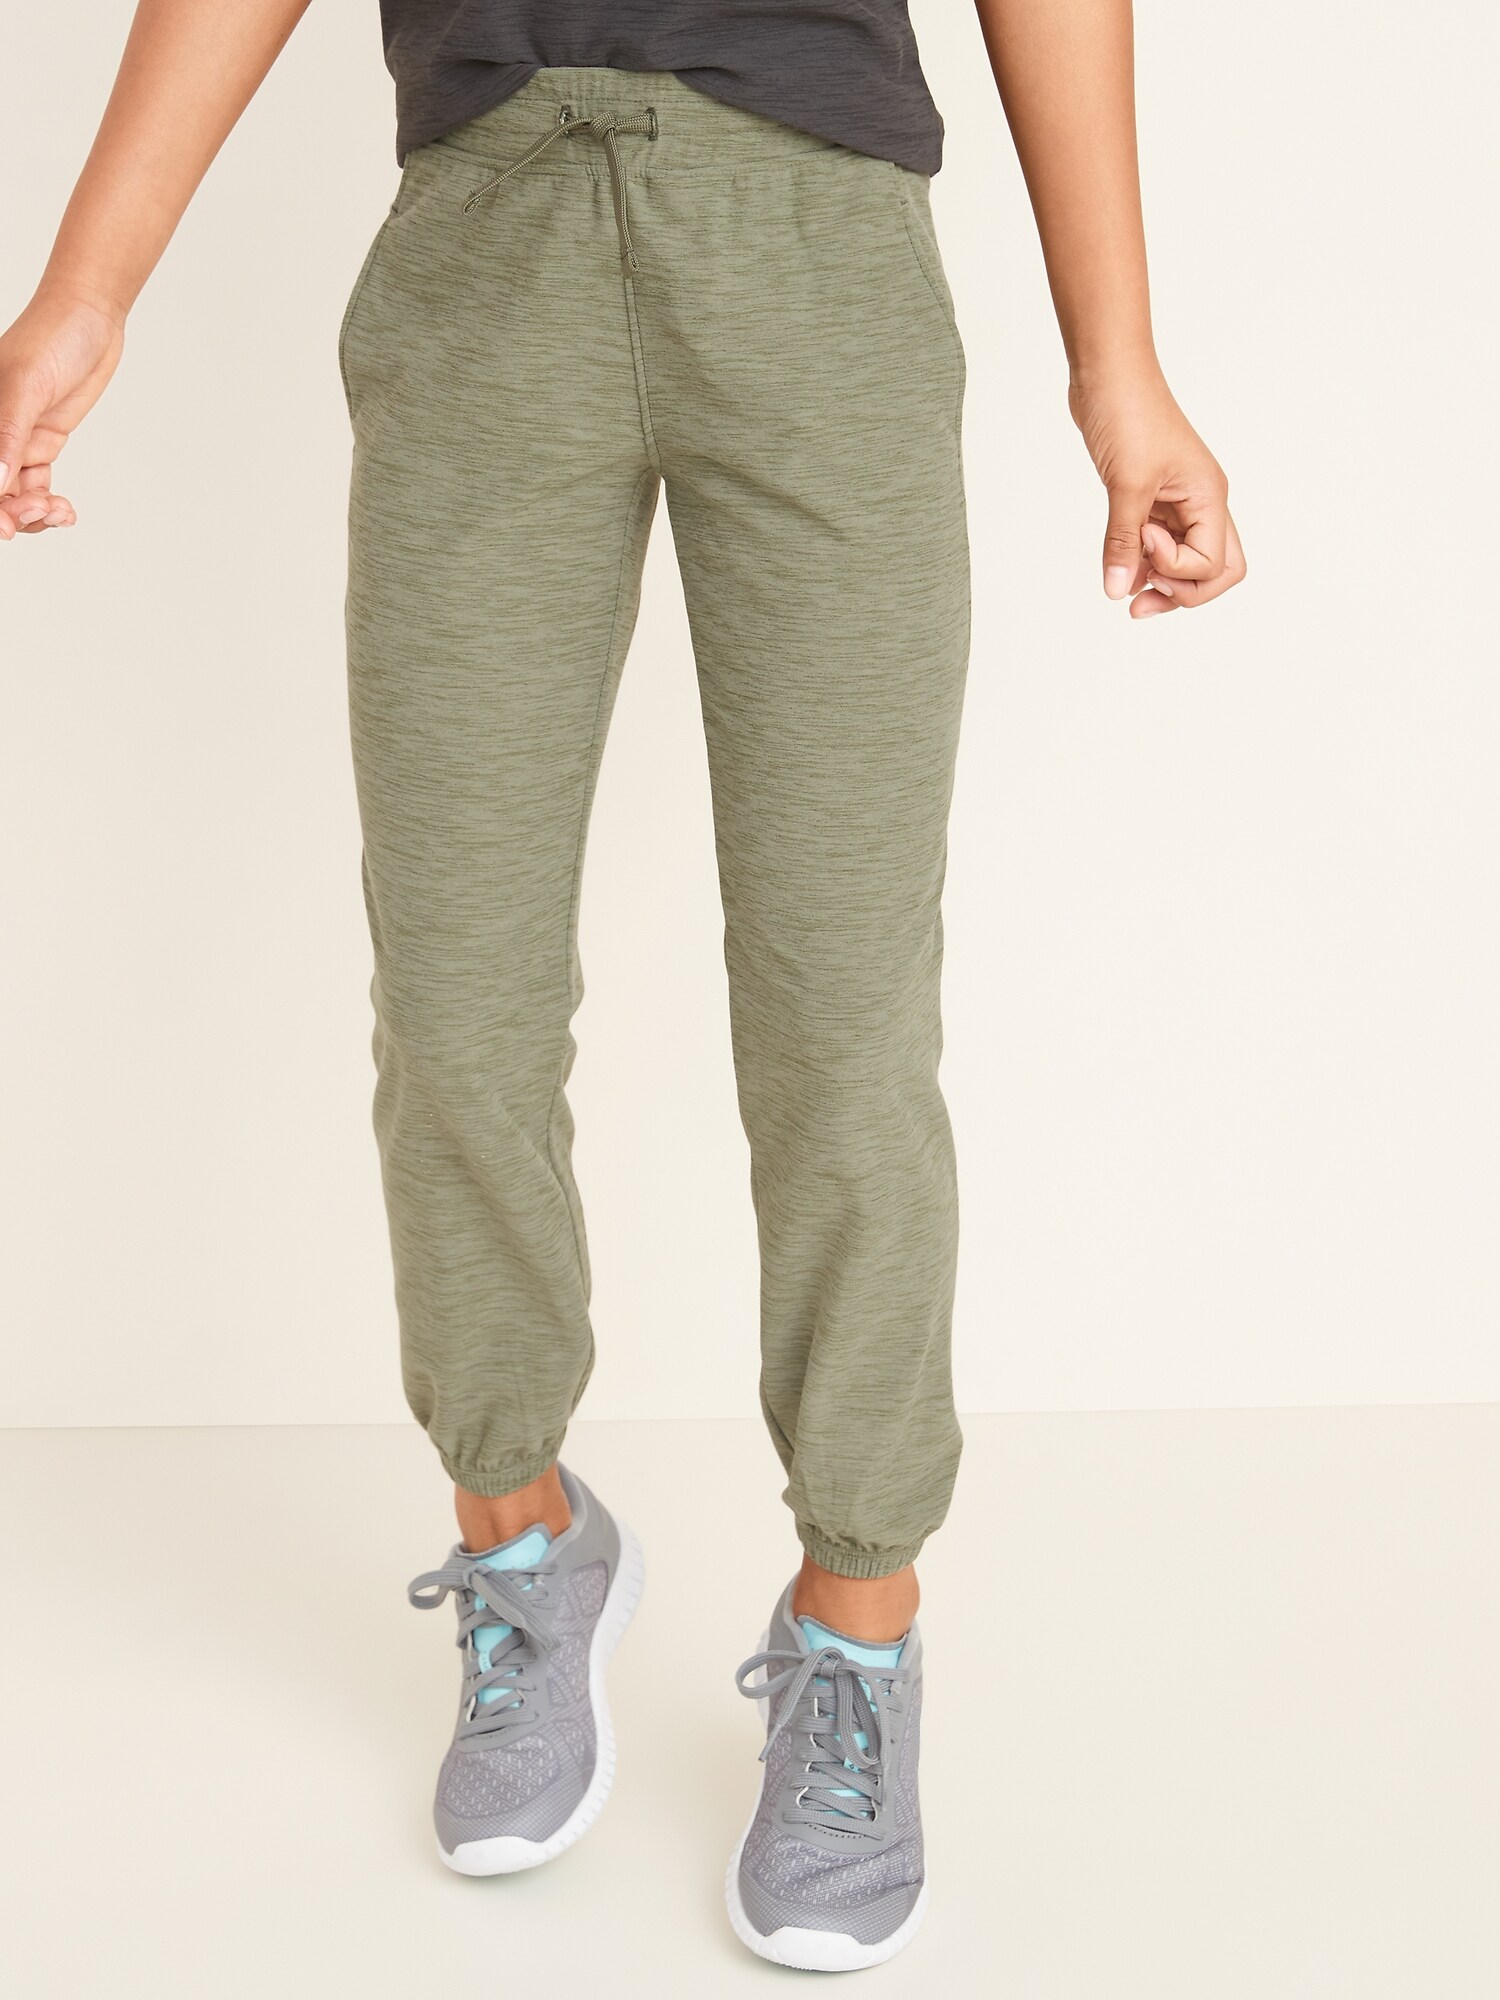 Ultra-Soft Breathe ON Joggers for Girls